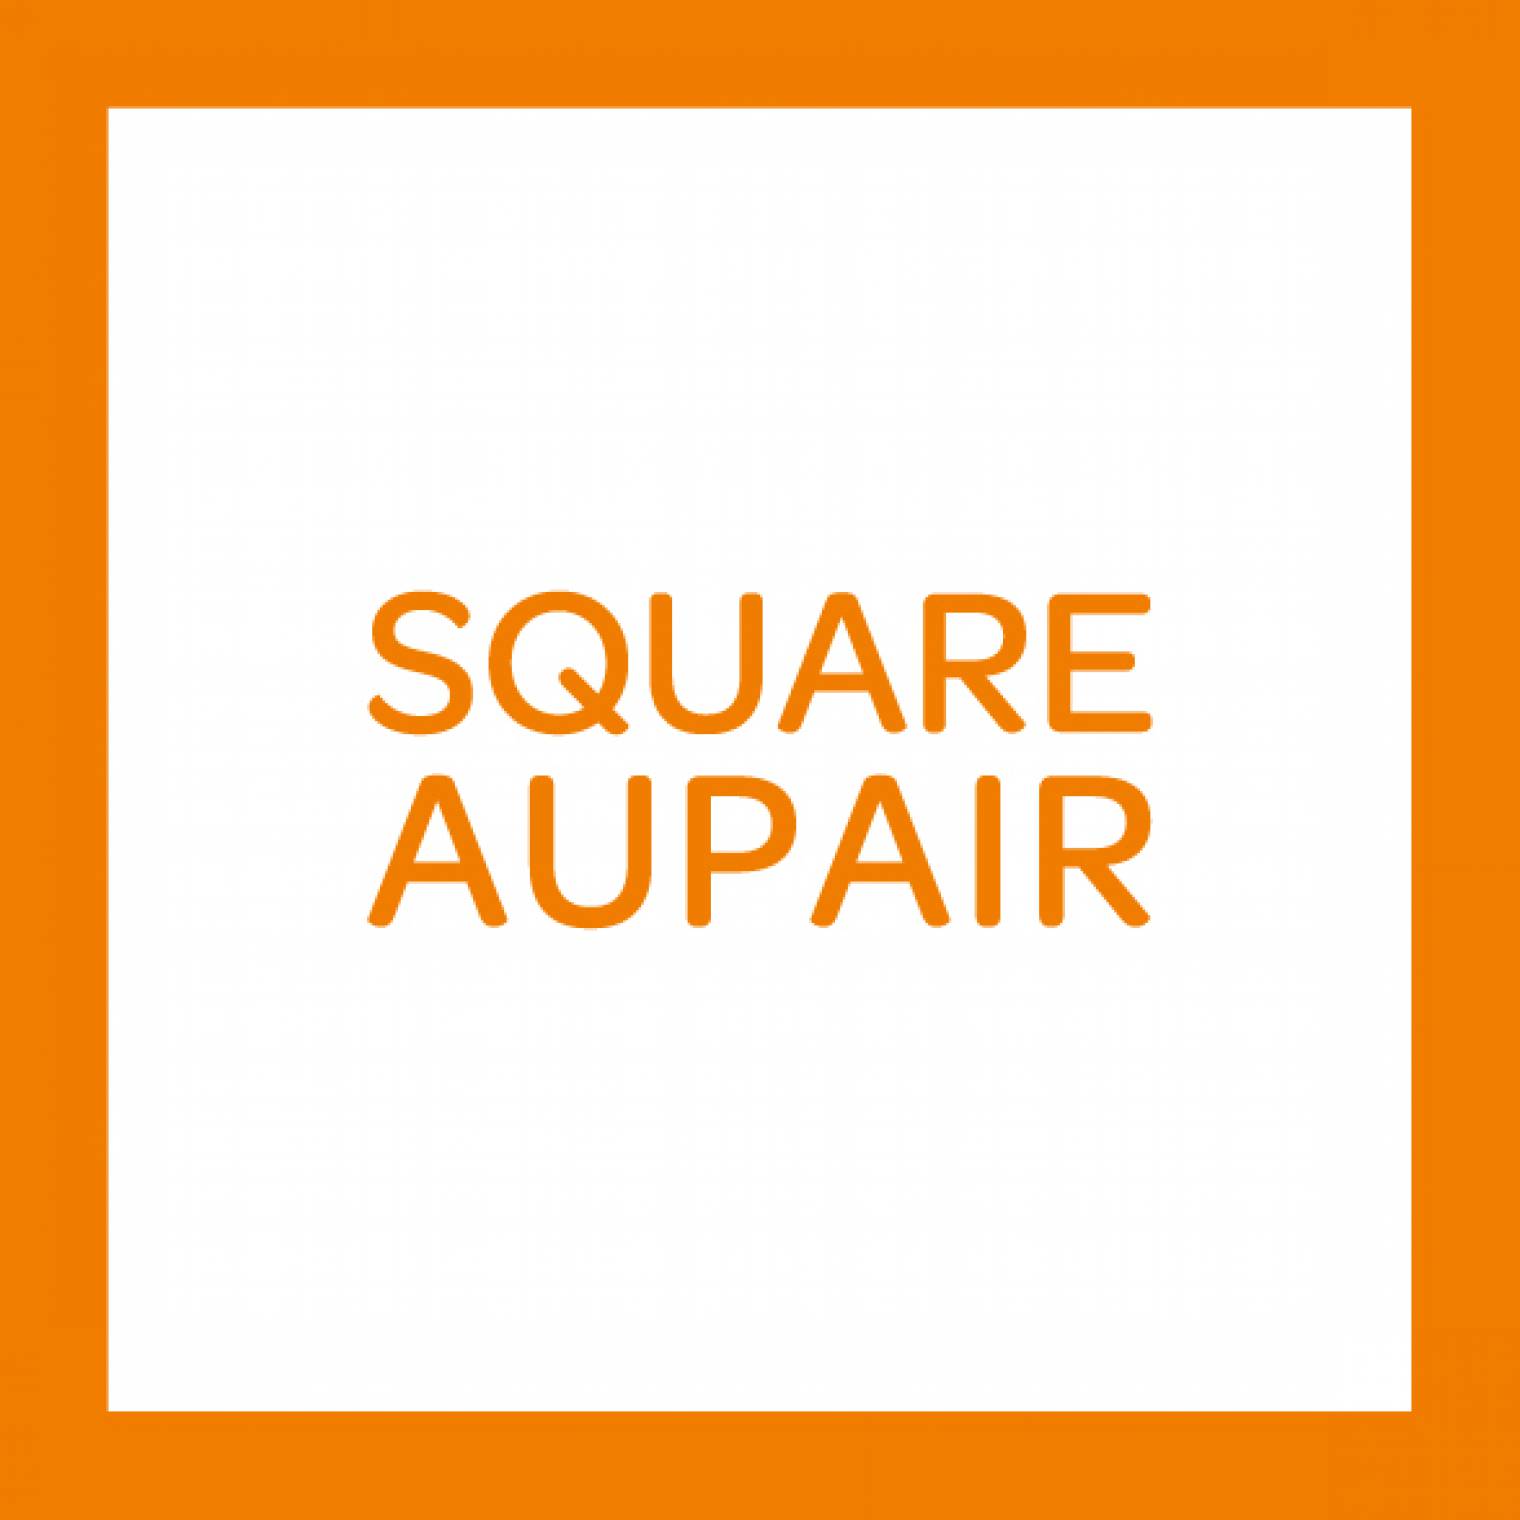 Welcome to our latest Affiliate Member Square AuPair, UK